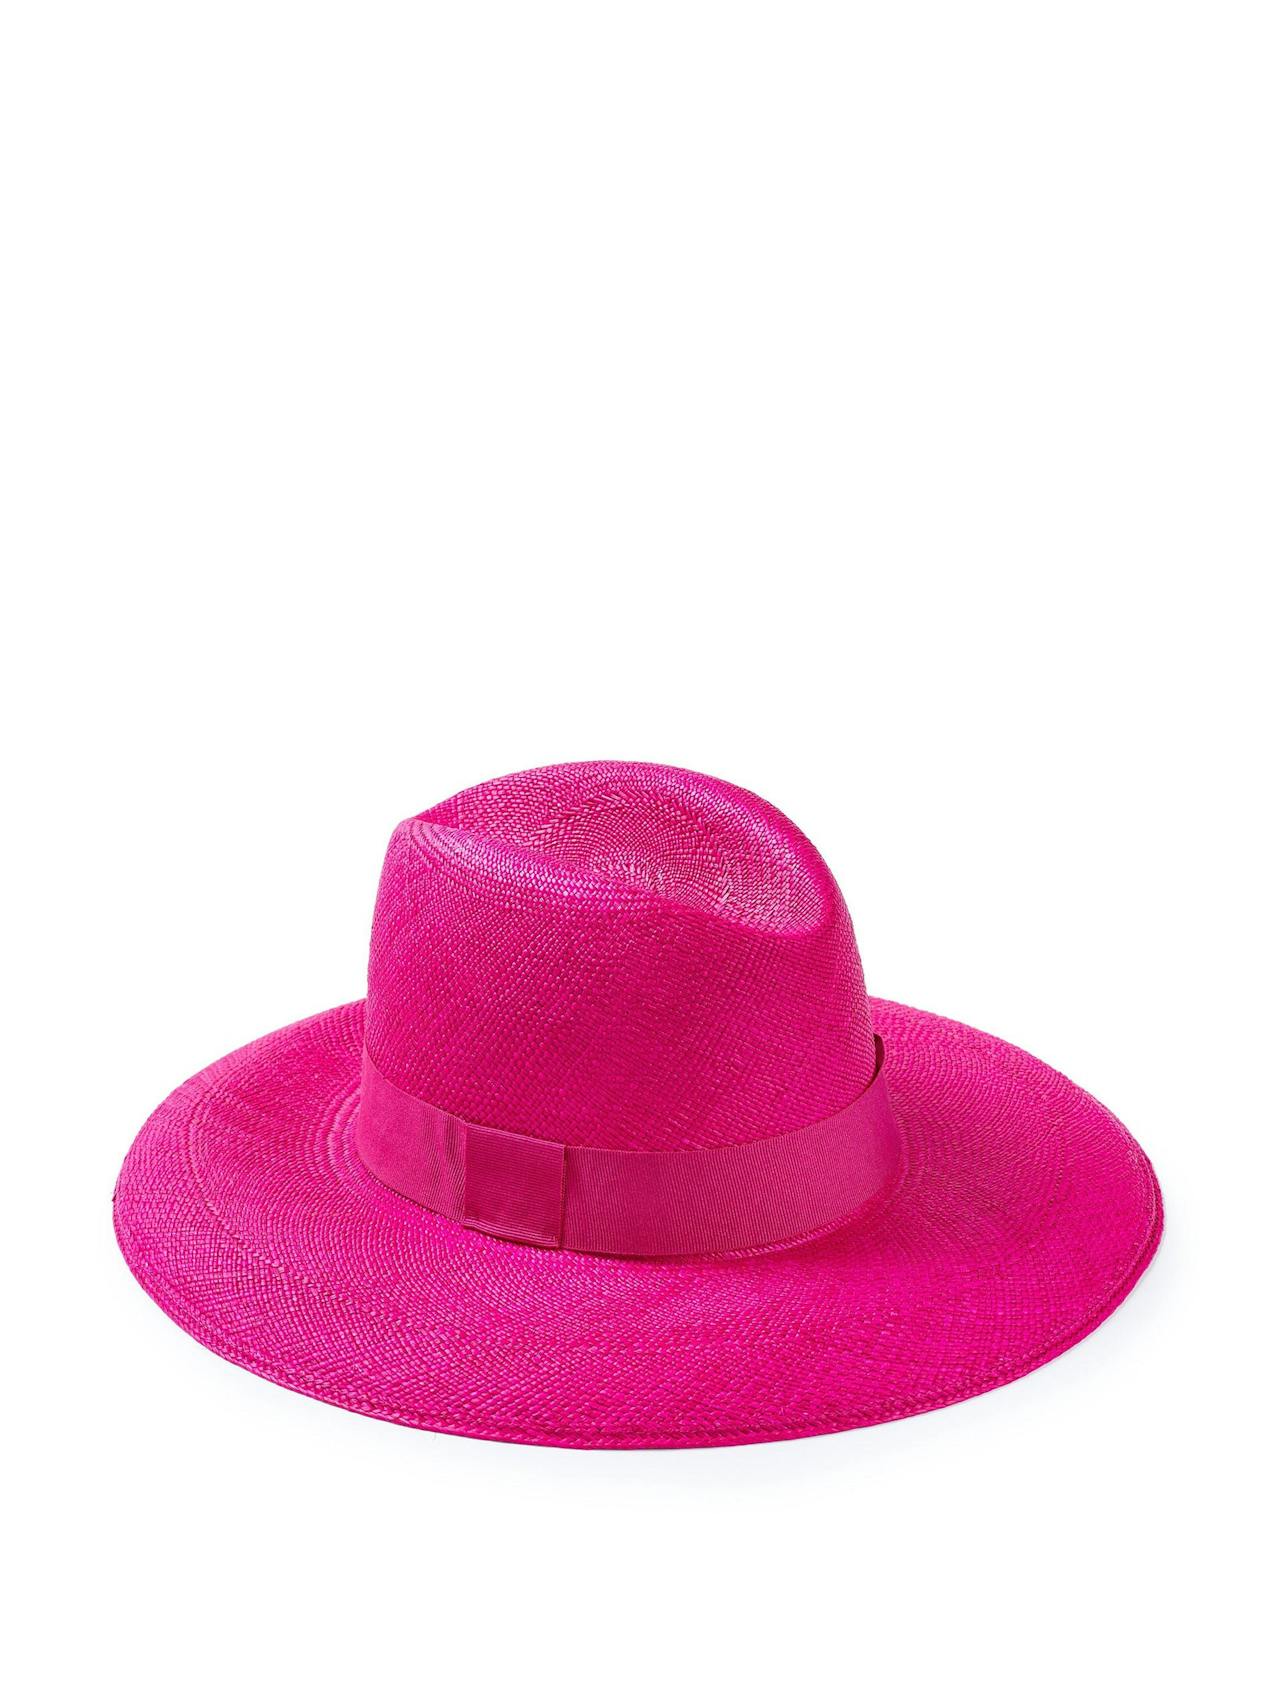 Livia hat in pink